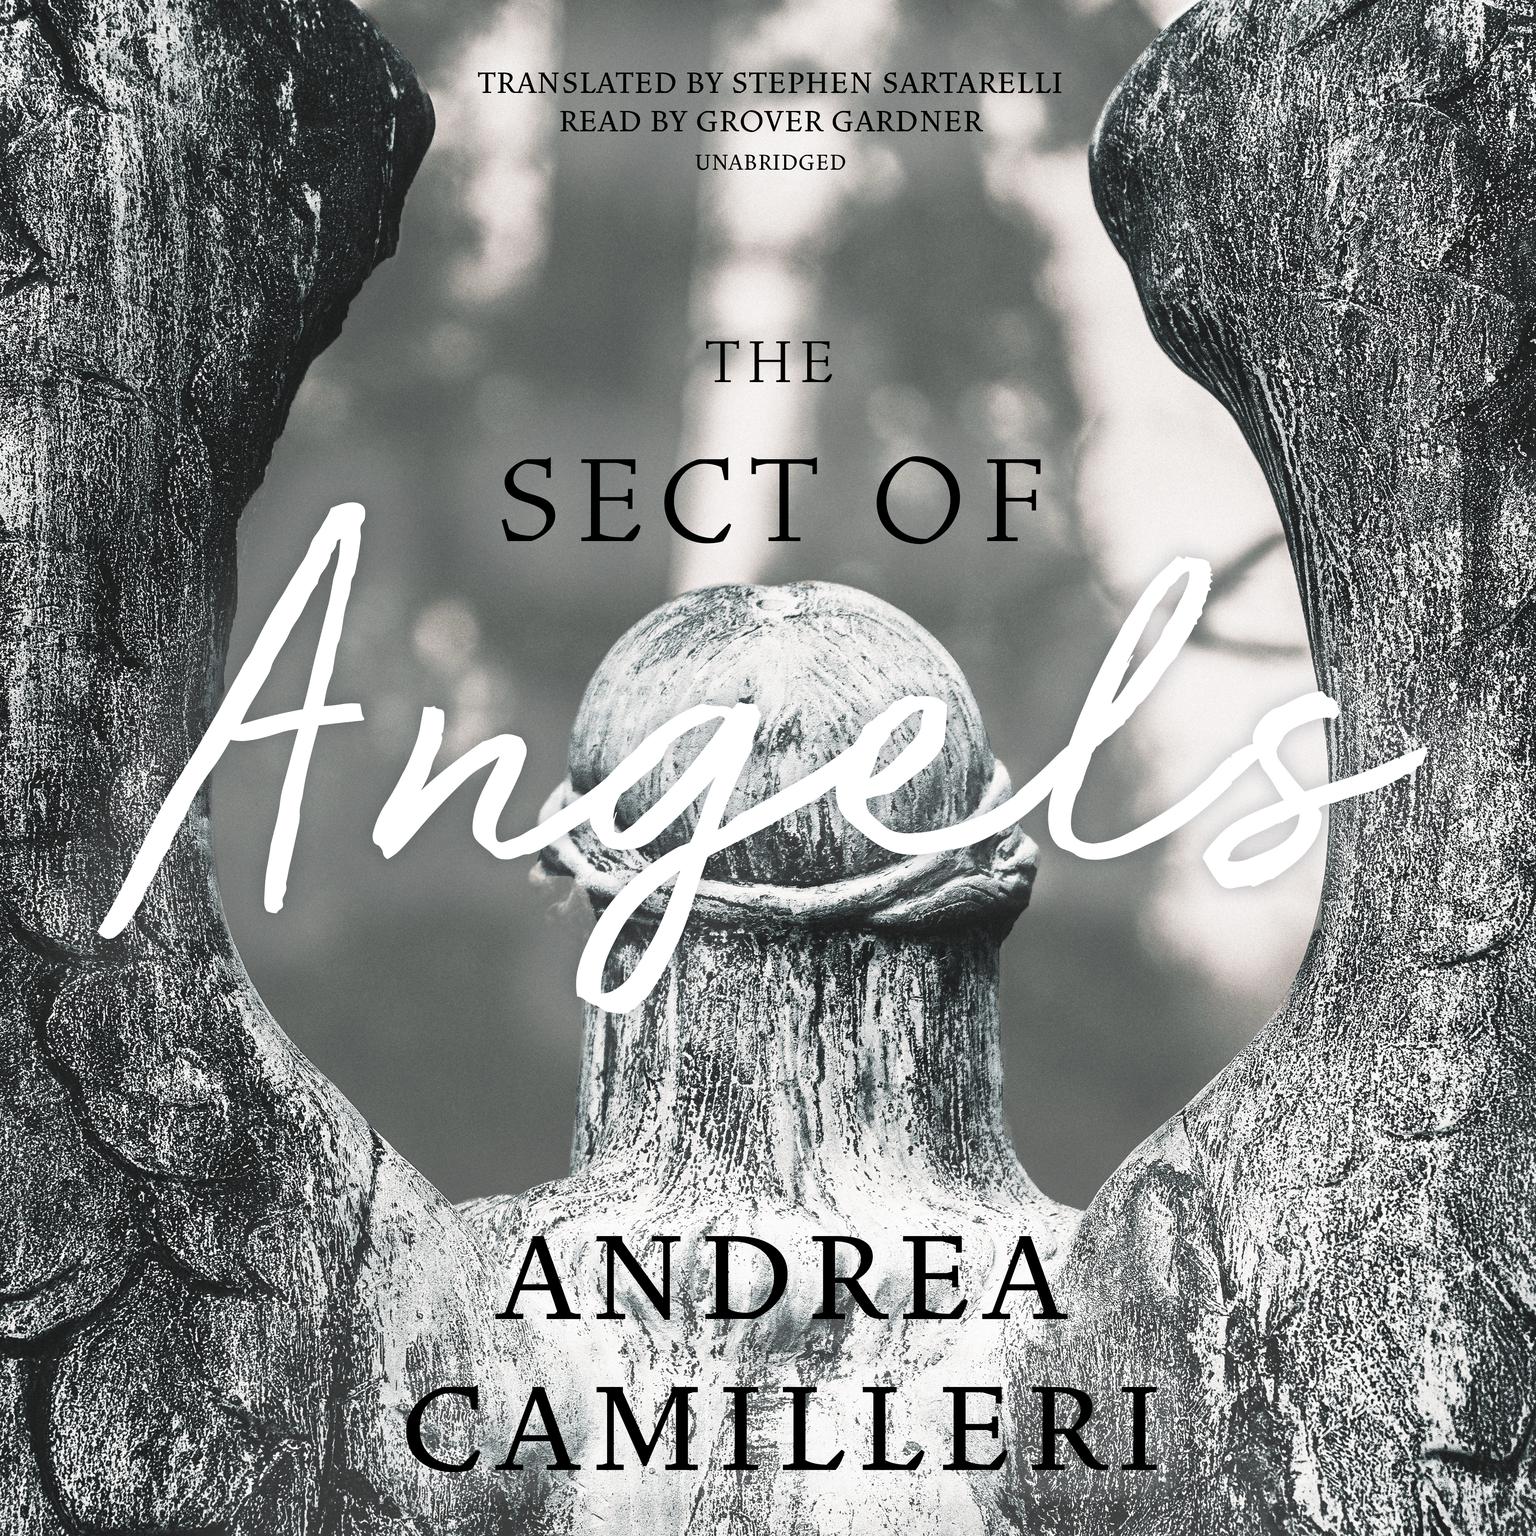 The Sect of Angels Audiobook, by Andrea Camilleri